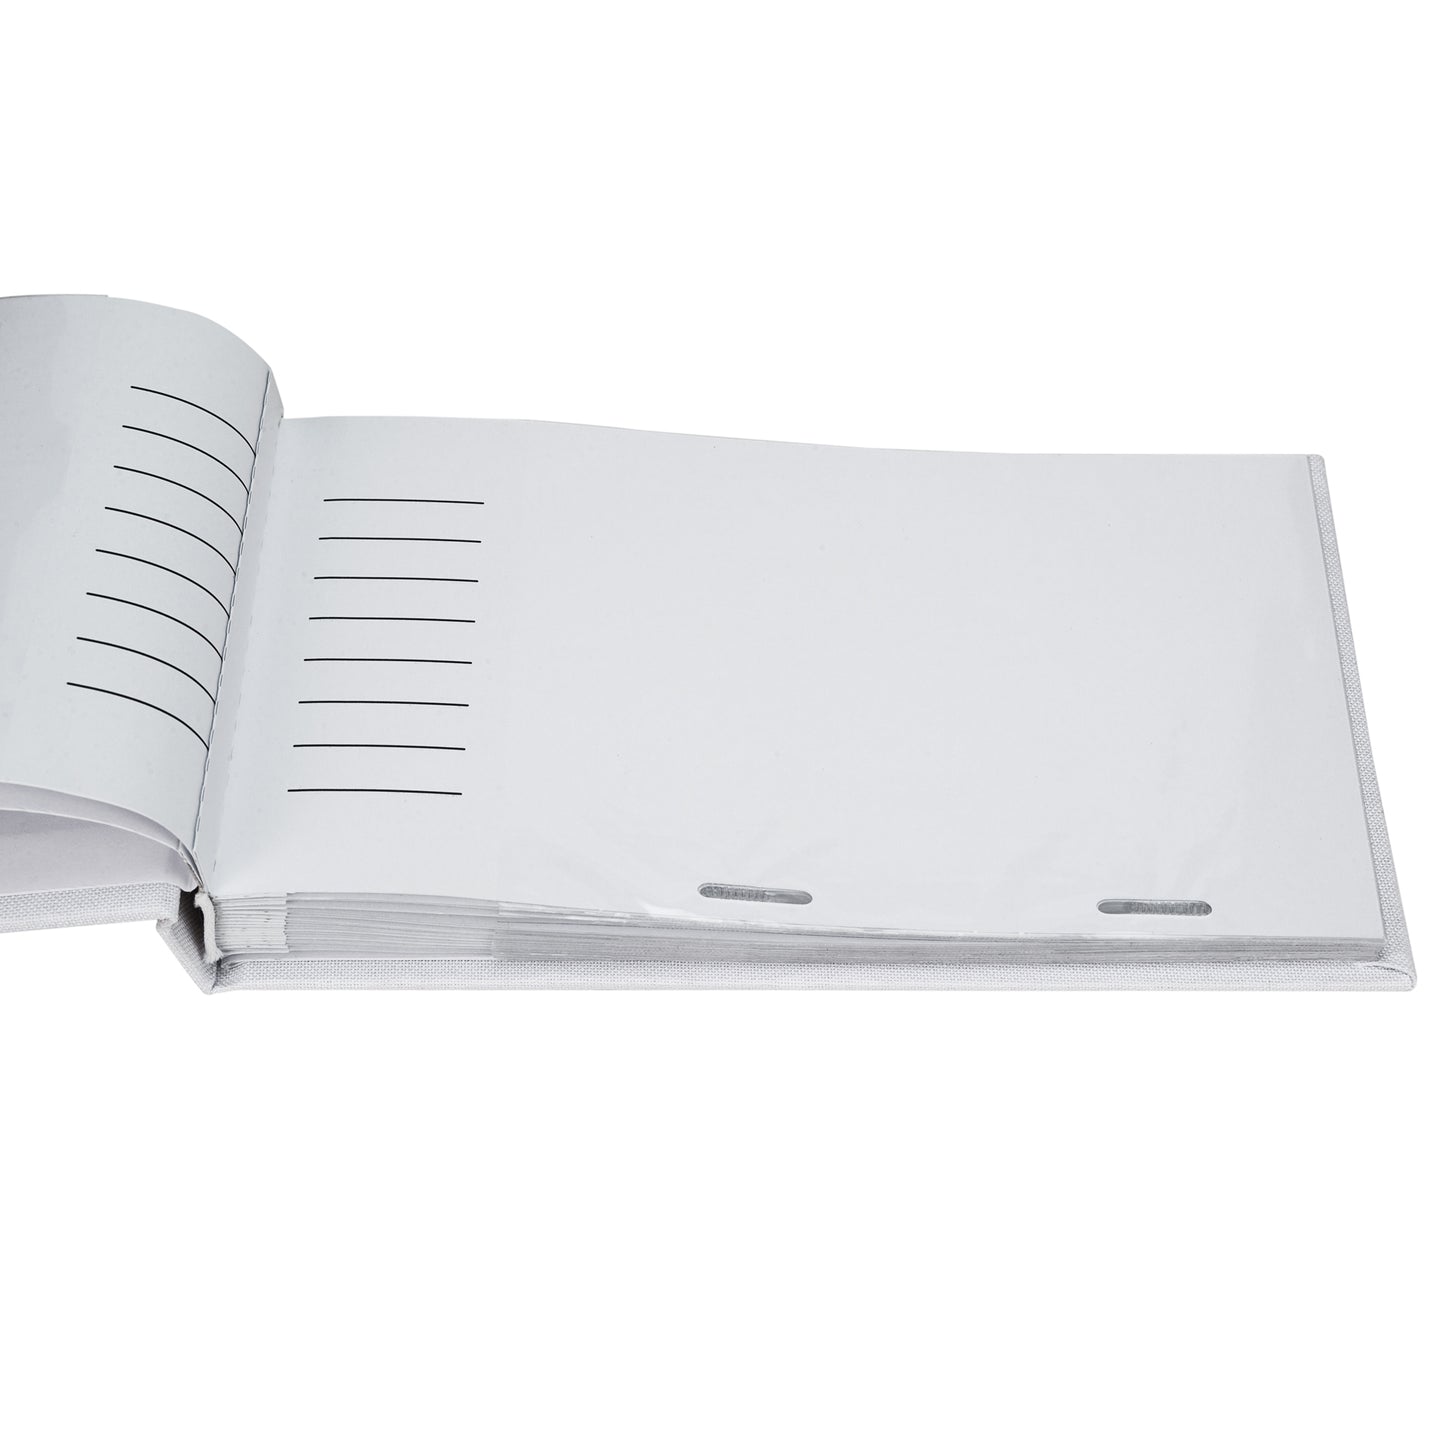 Blank photo albums to decorate yourself!